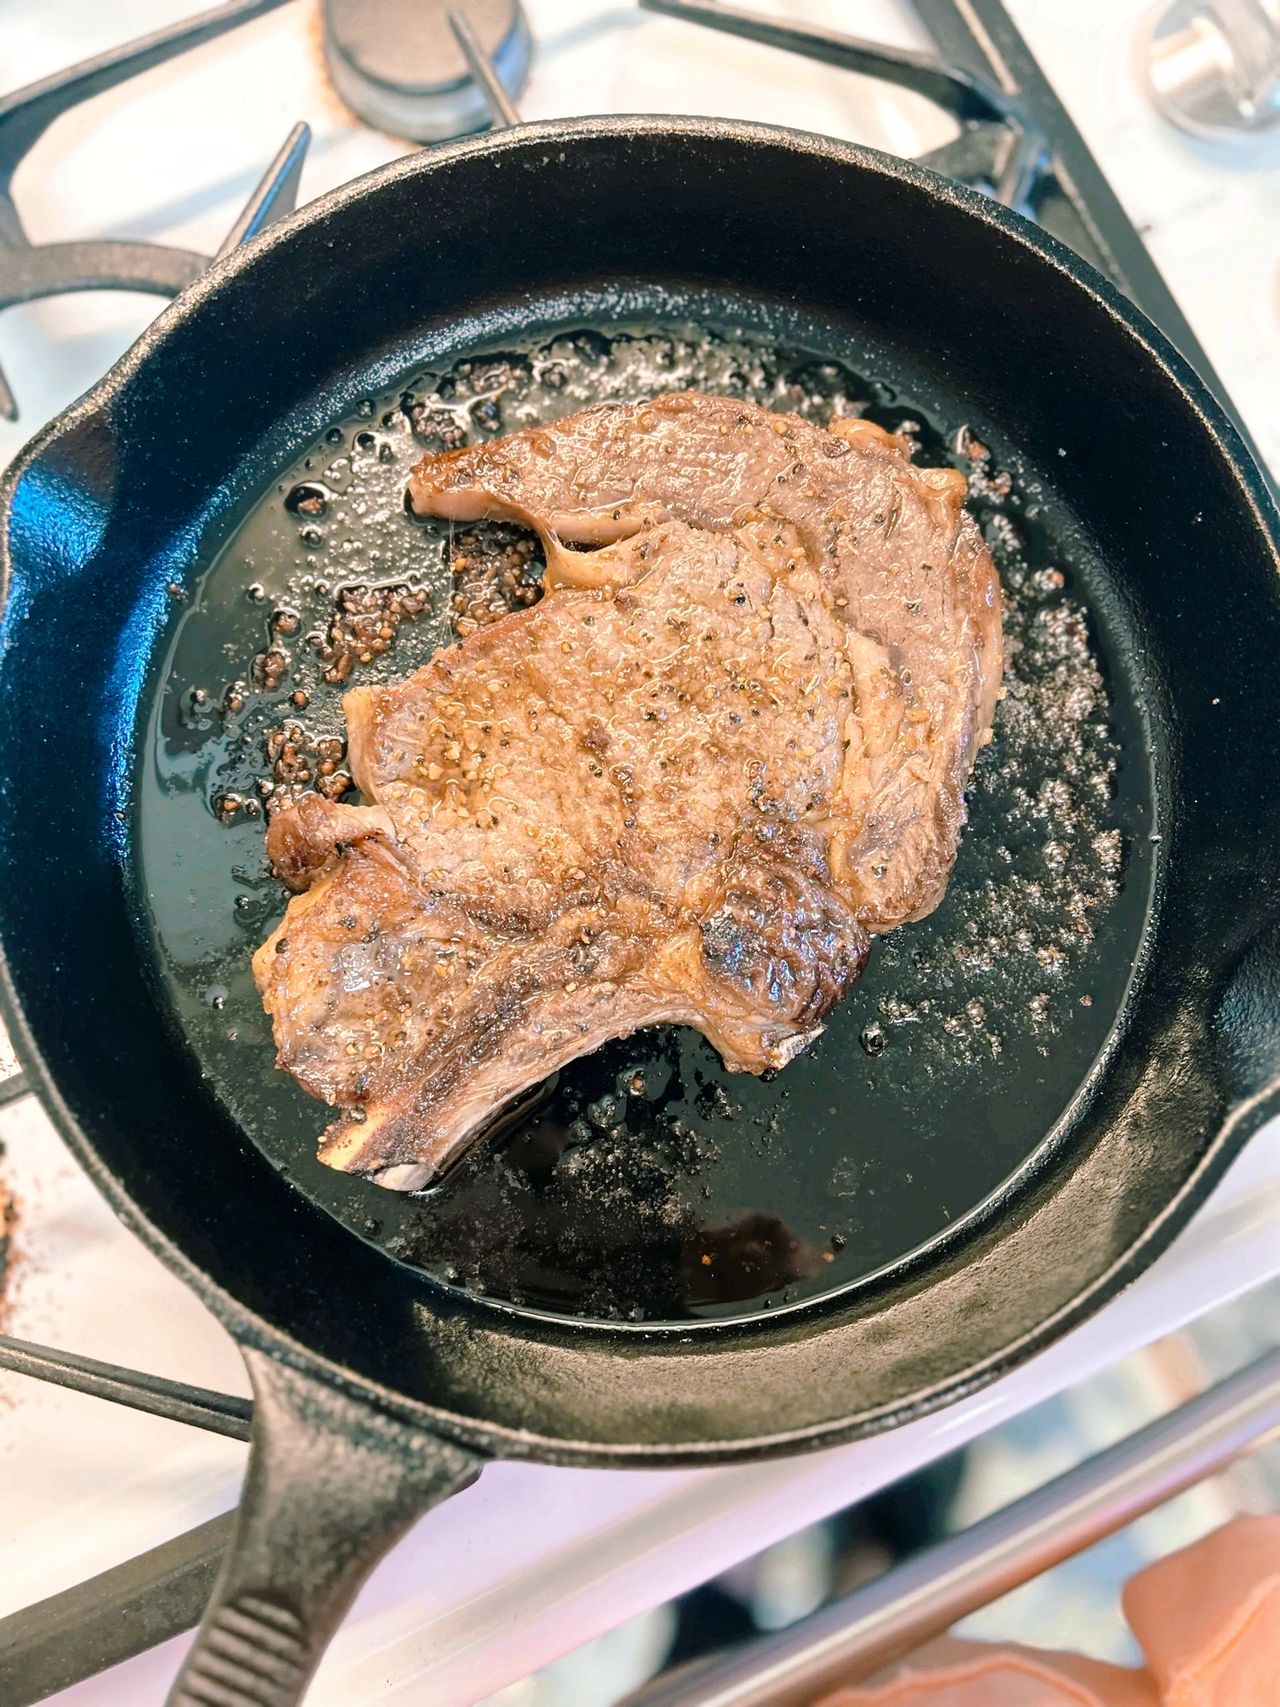 Cast-iron skillet with large steak in it.